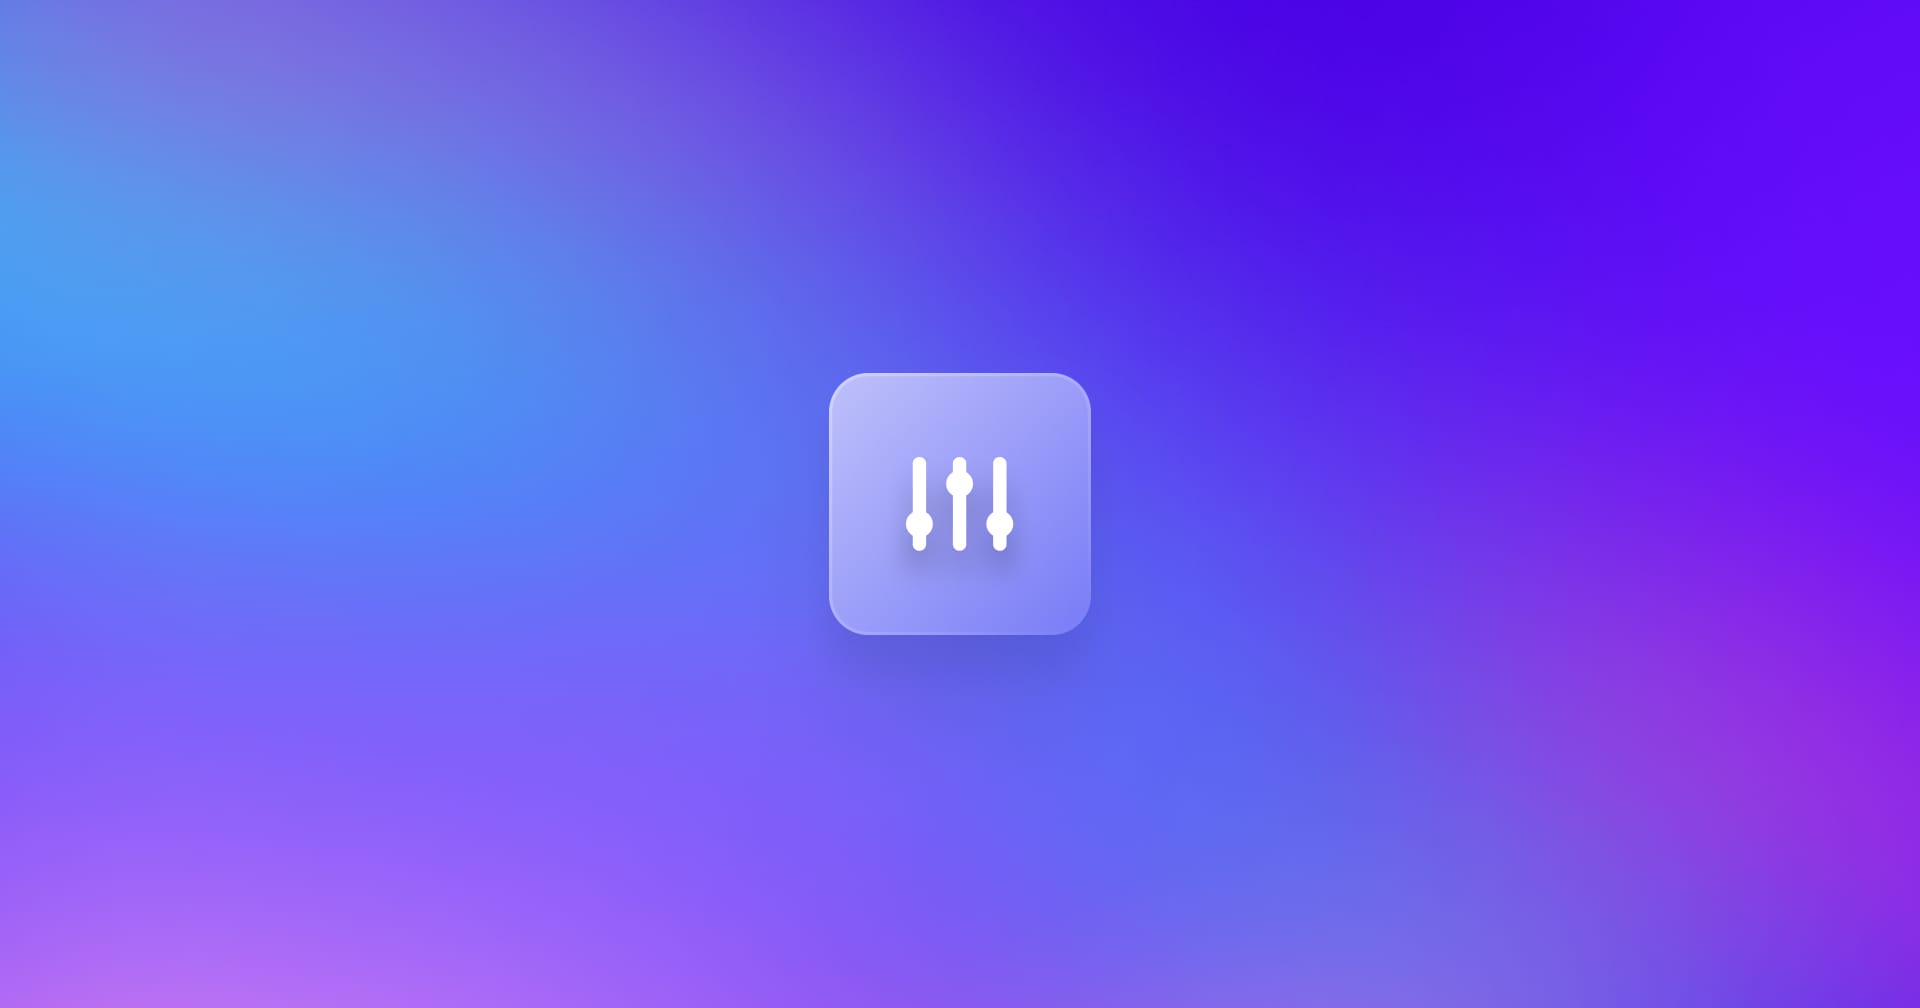 A settings icon on a blue and magenta gradient background